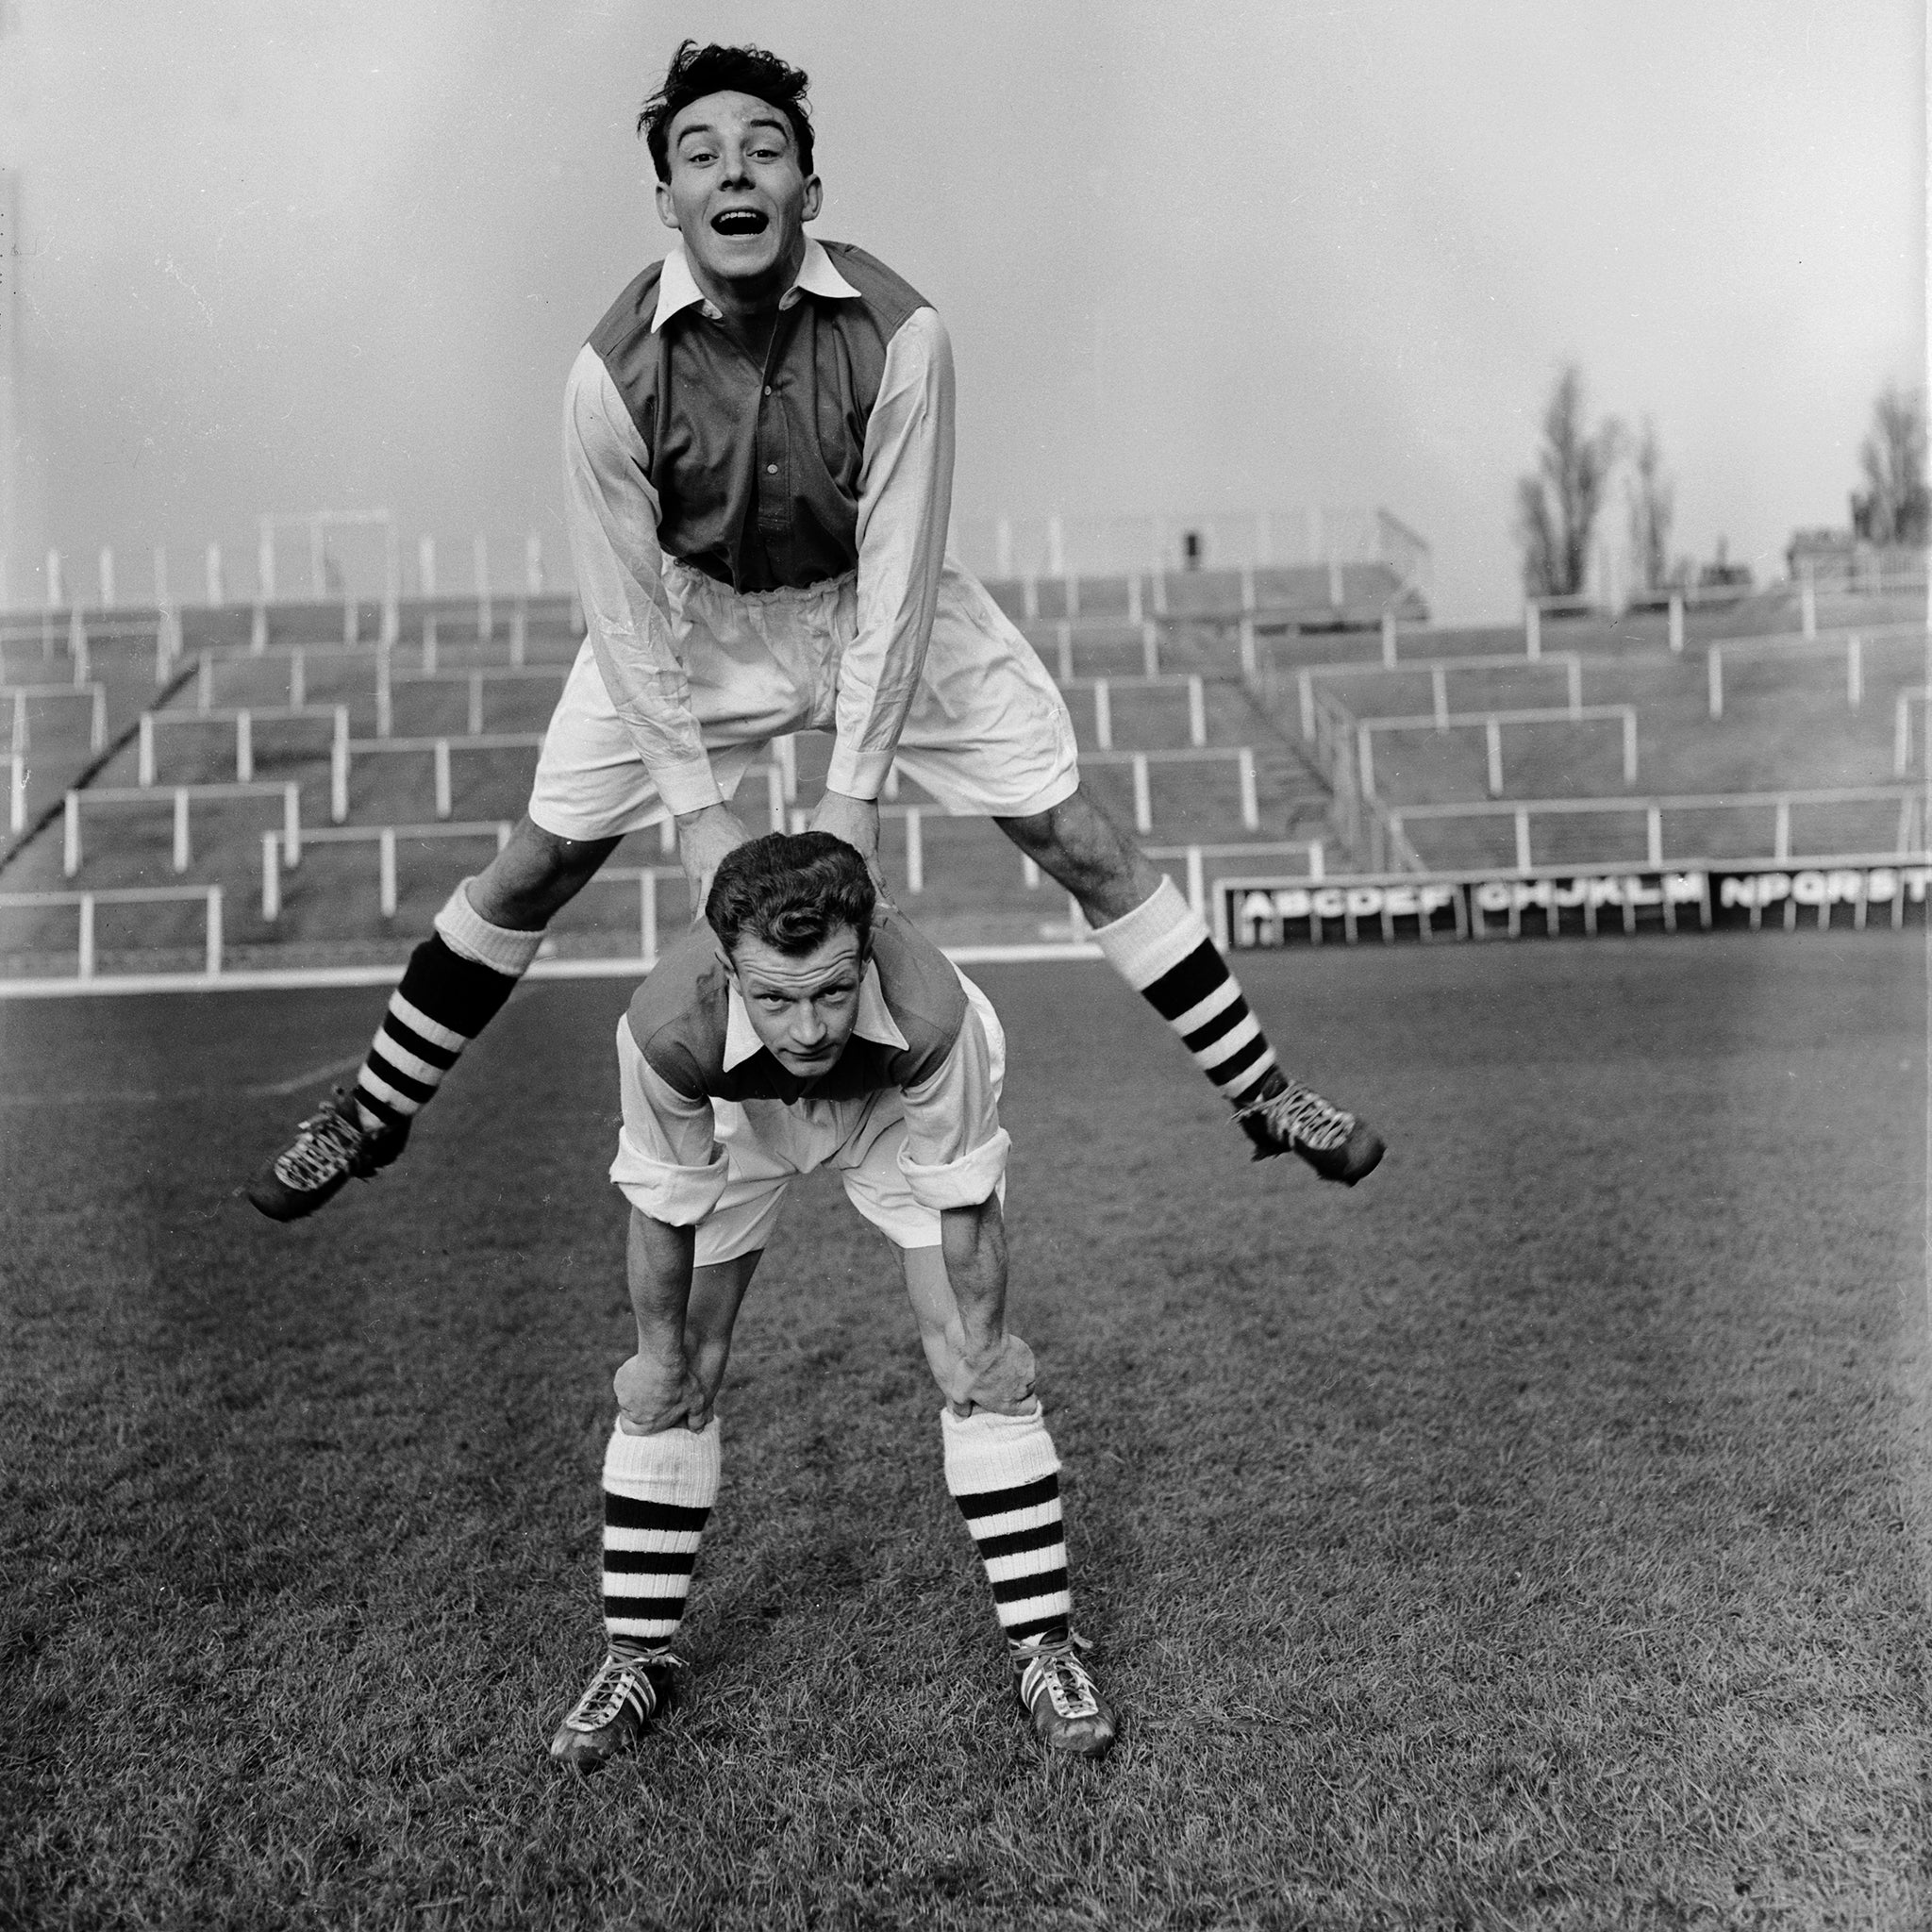 Arsenal's new signings from Leyton Orient, Vic Groves (jumping) and Stan Charlton, enjoying their first day of trraining at Arsenal's Highbury Stadium in North London in 1955.